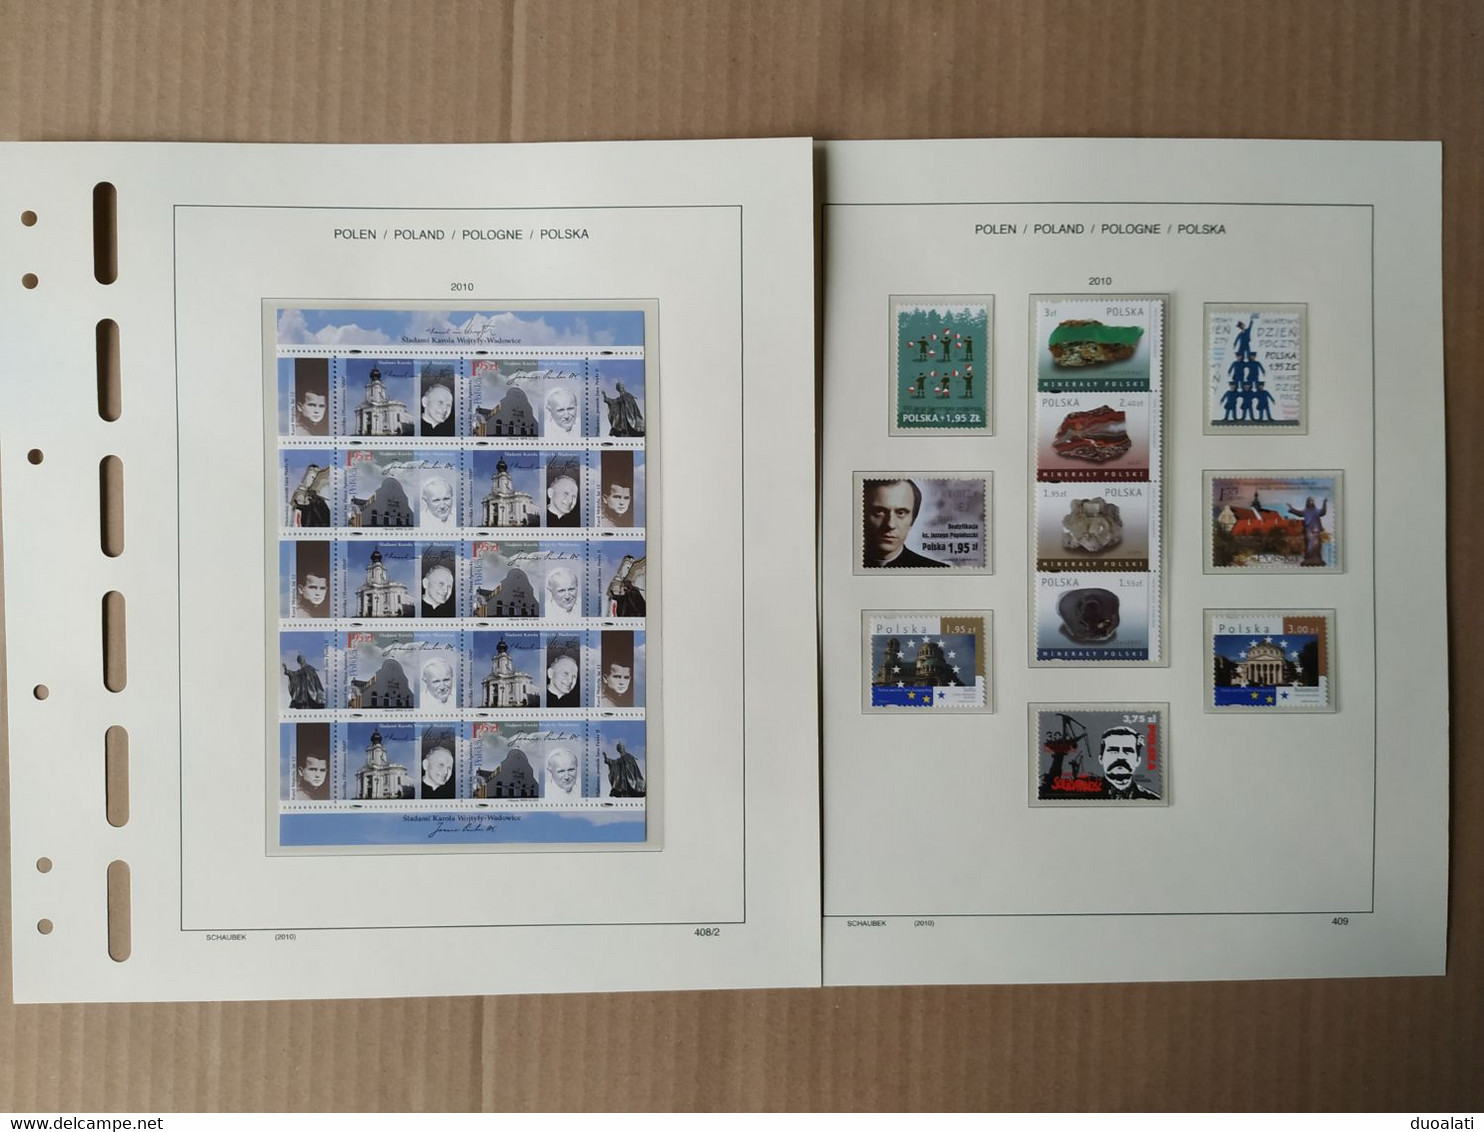 Poland Polska 2010 Almost Complete Year Set ( 2 Blocks Missing) MNH On Schaubek Illustrated Pages With Hawid Mounts - Collections